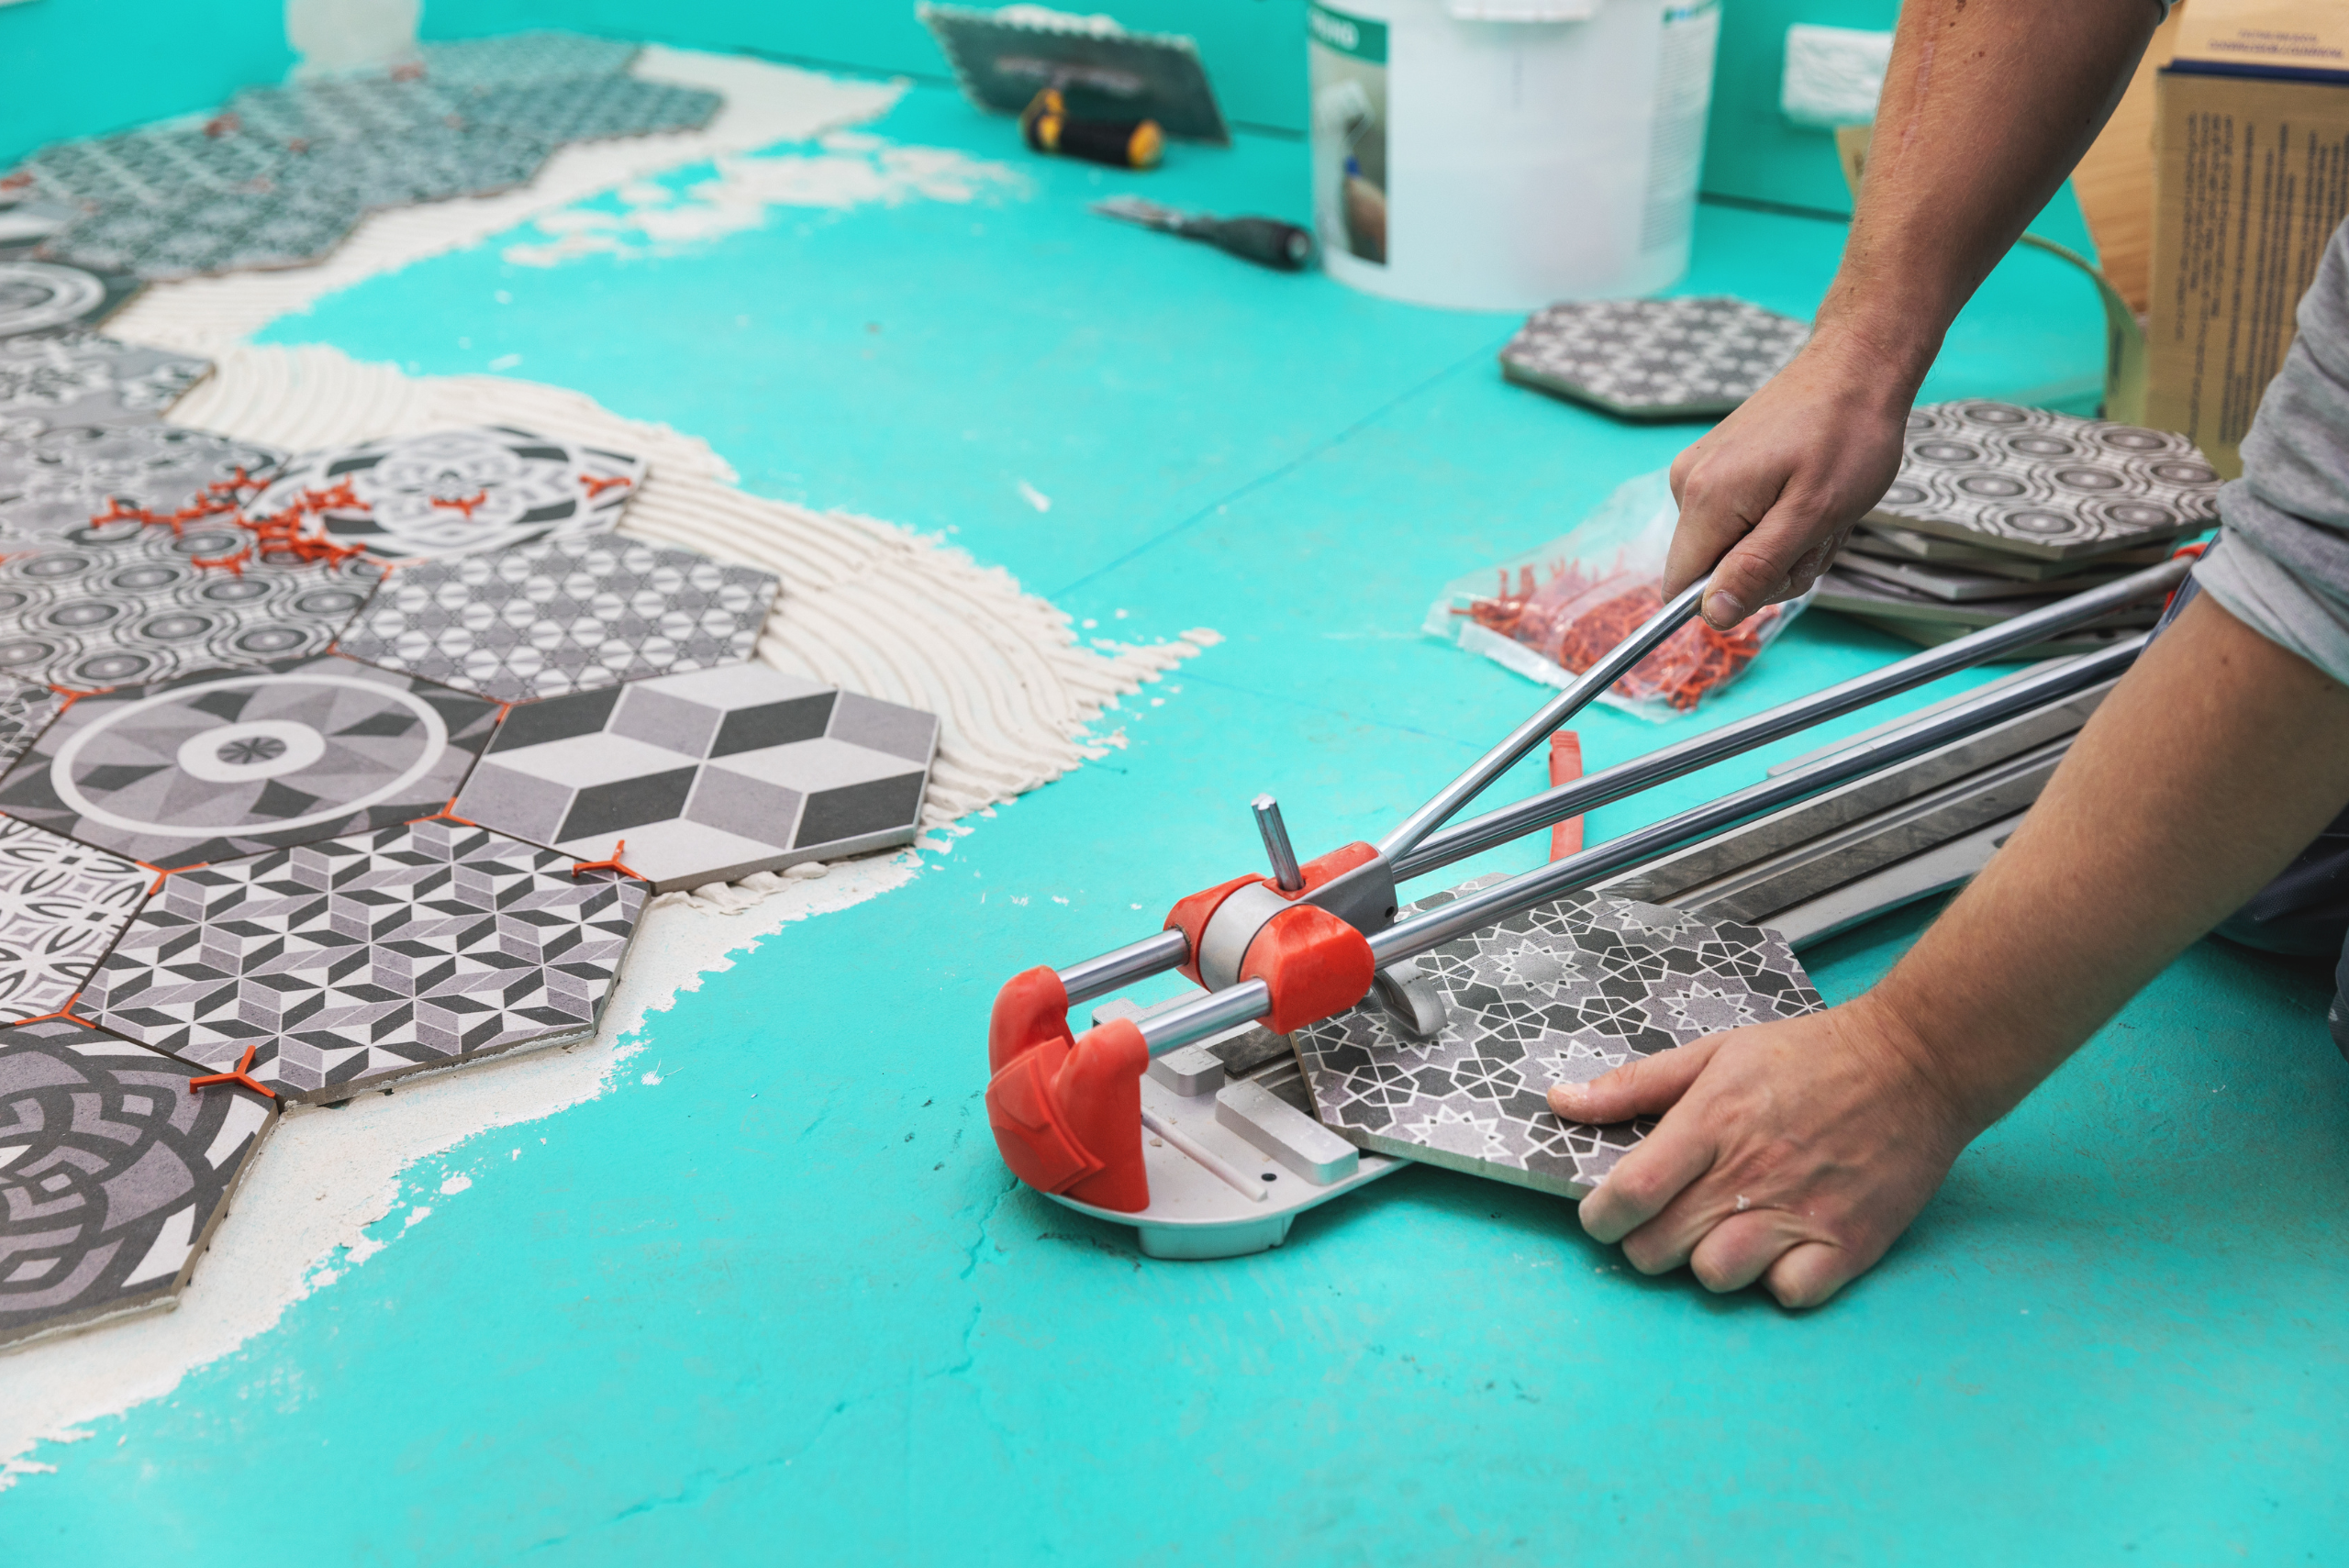 A person using a manual tile cutter.